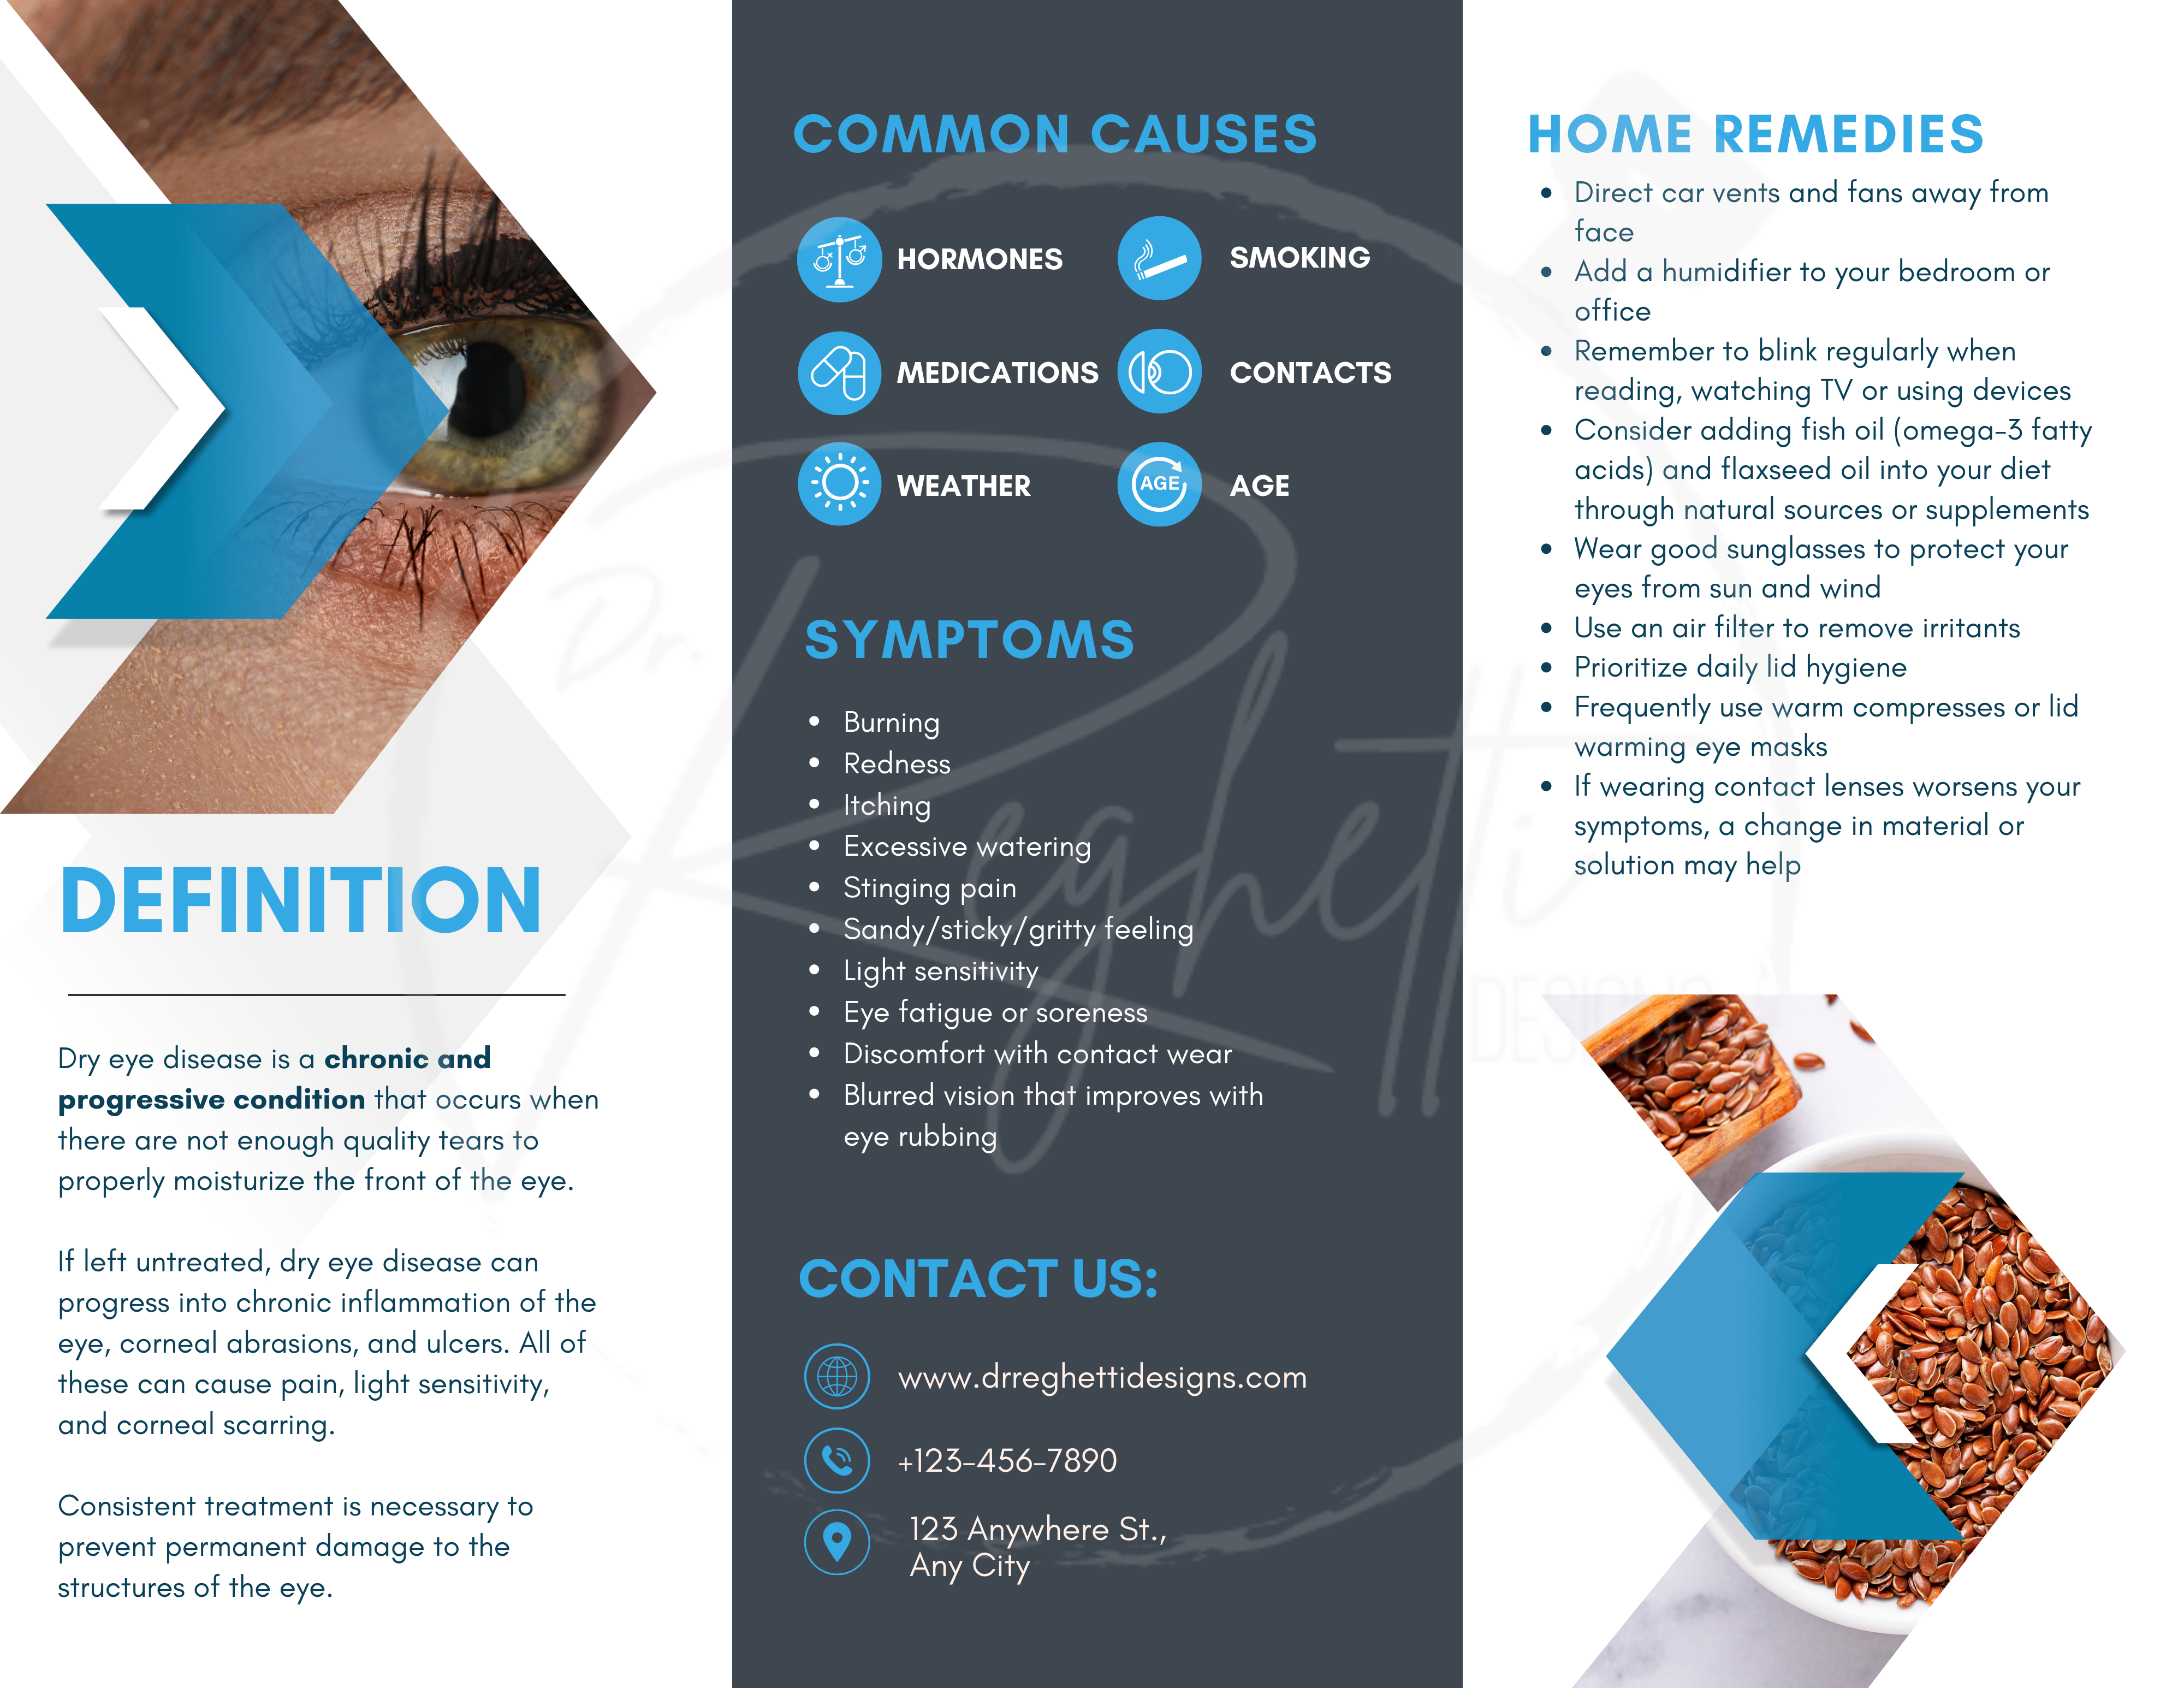 customizable dry eye treatment brochure for optometrists with treatment plan of home remedies and in office